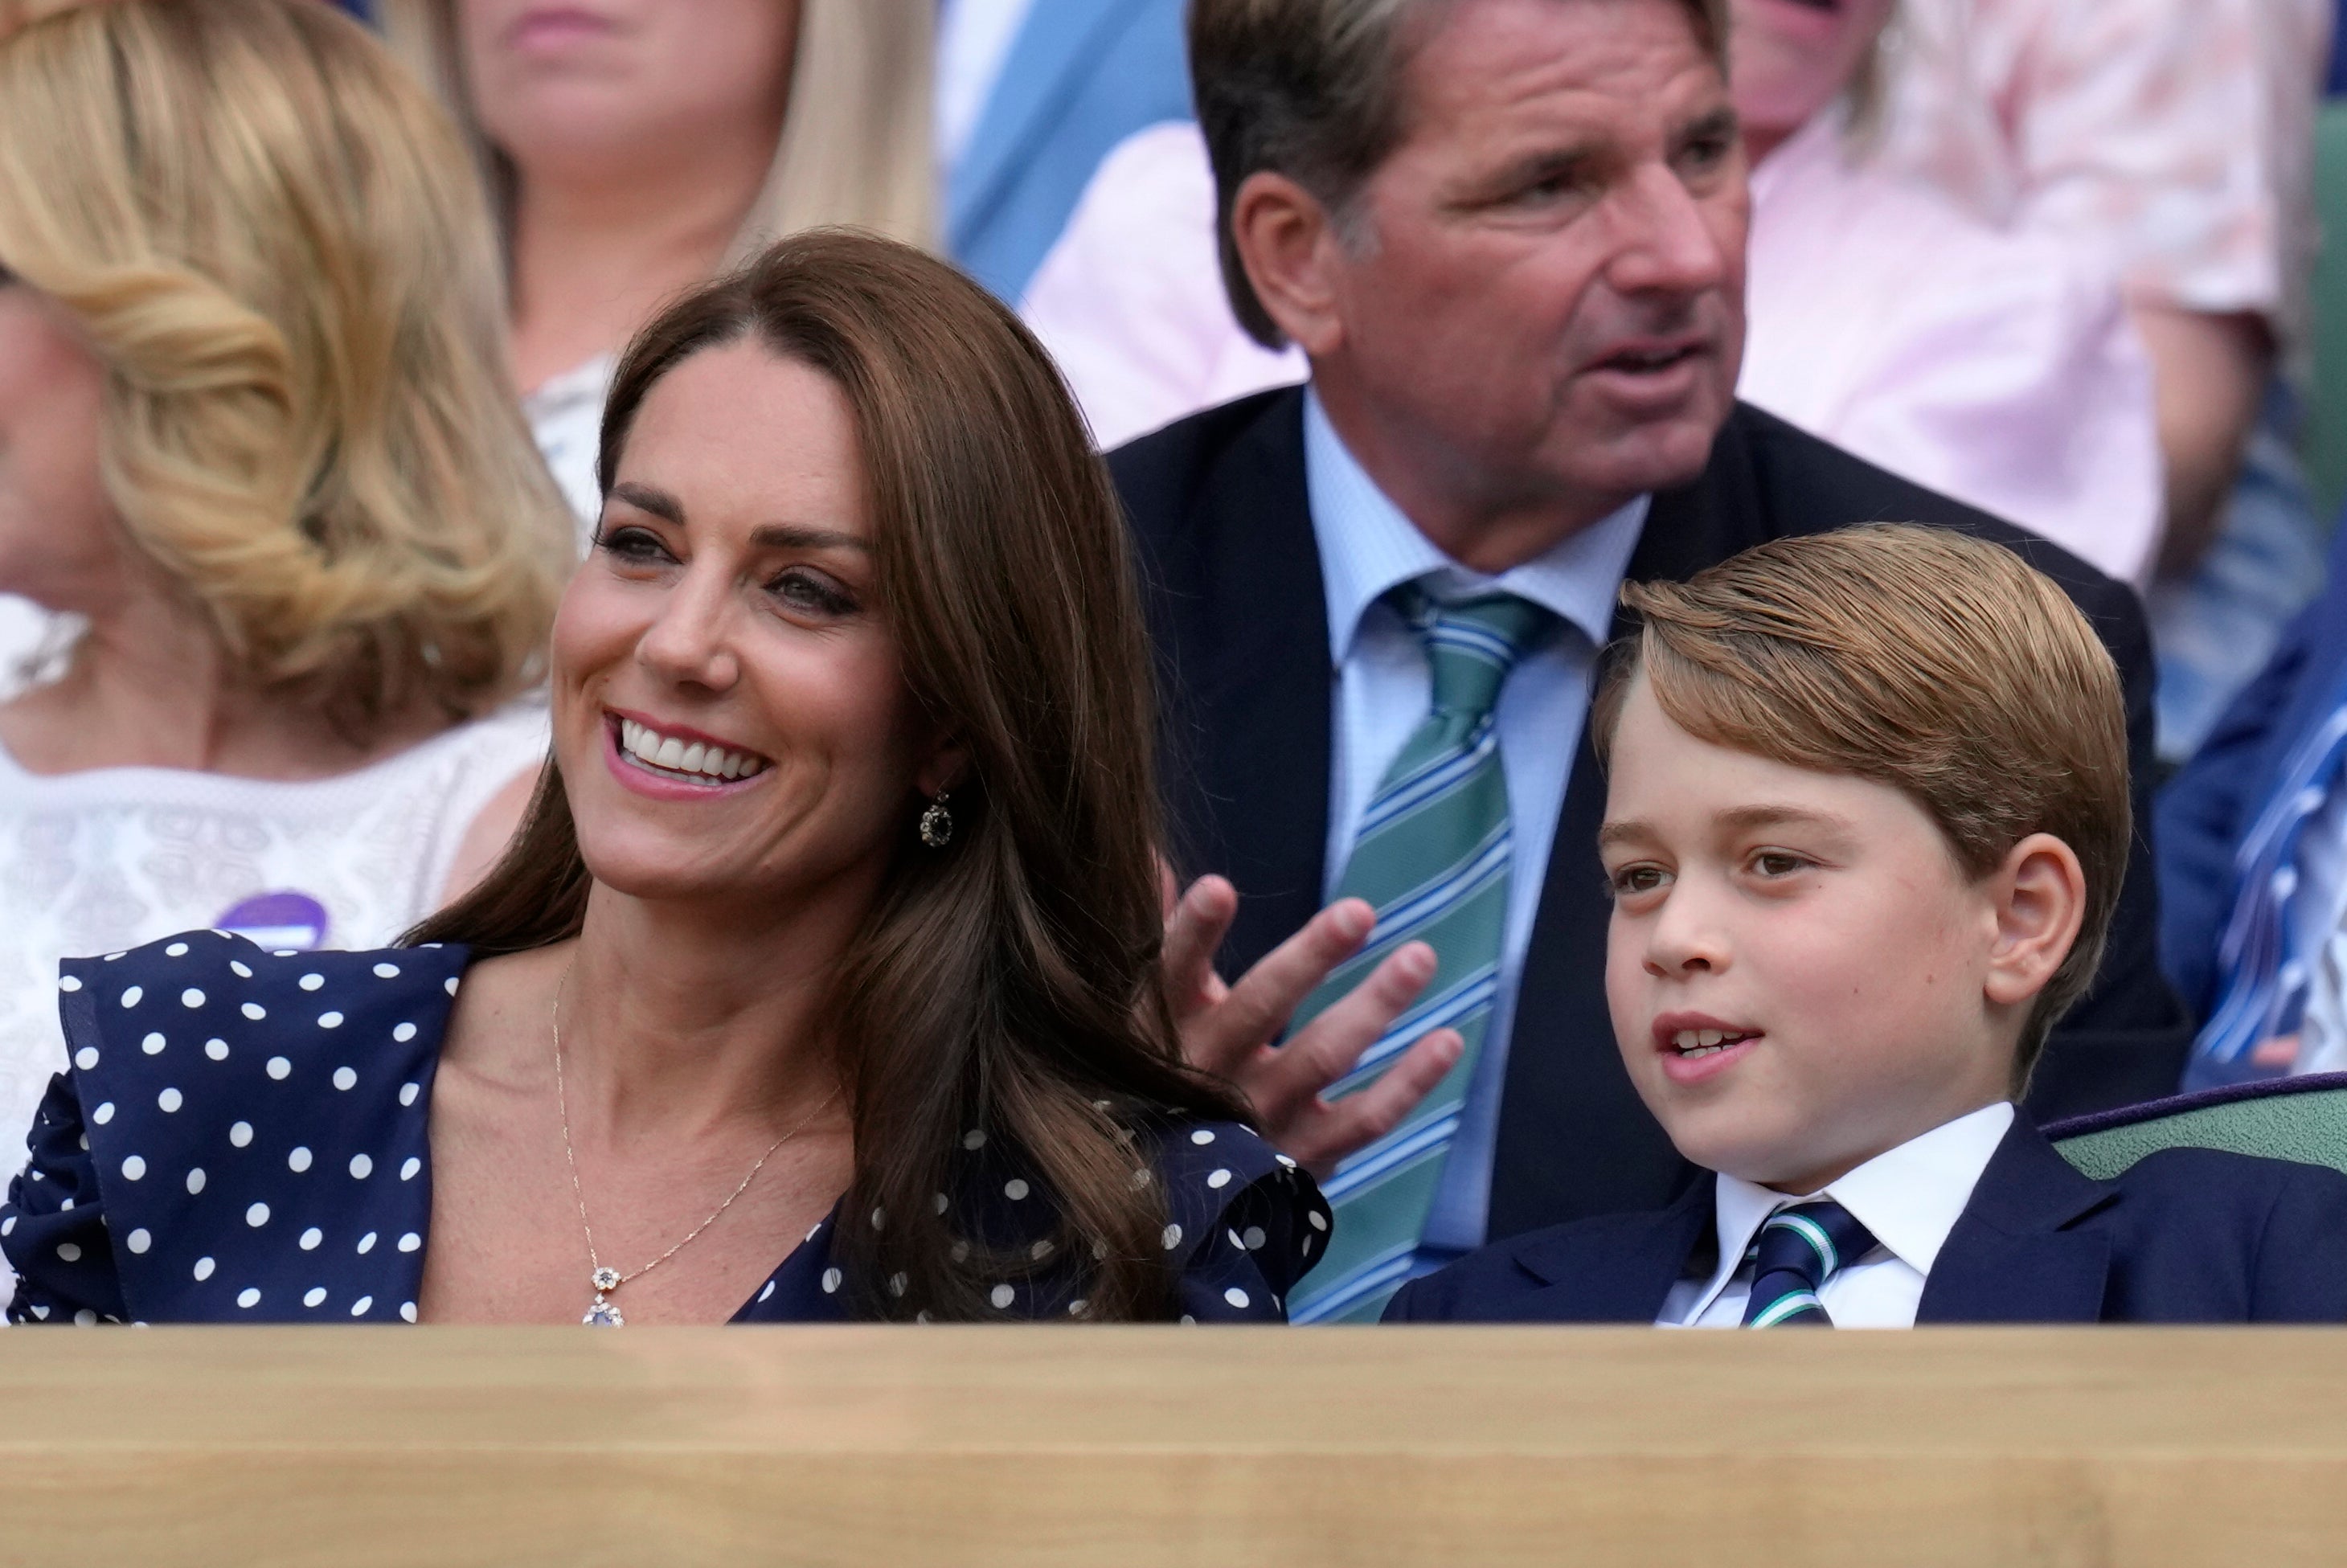 Officials are hoping that Kate Middleton will attend the tournament.